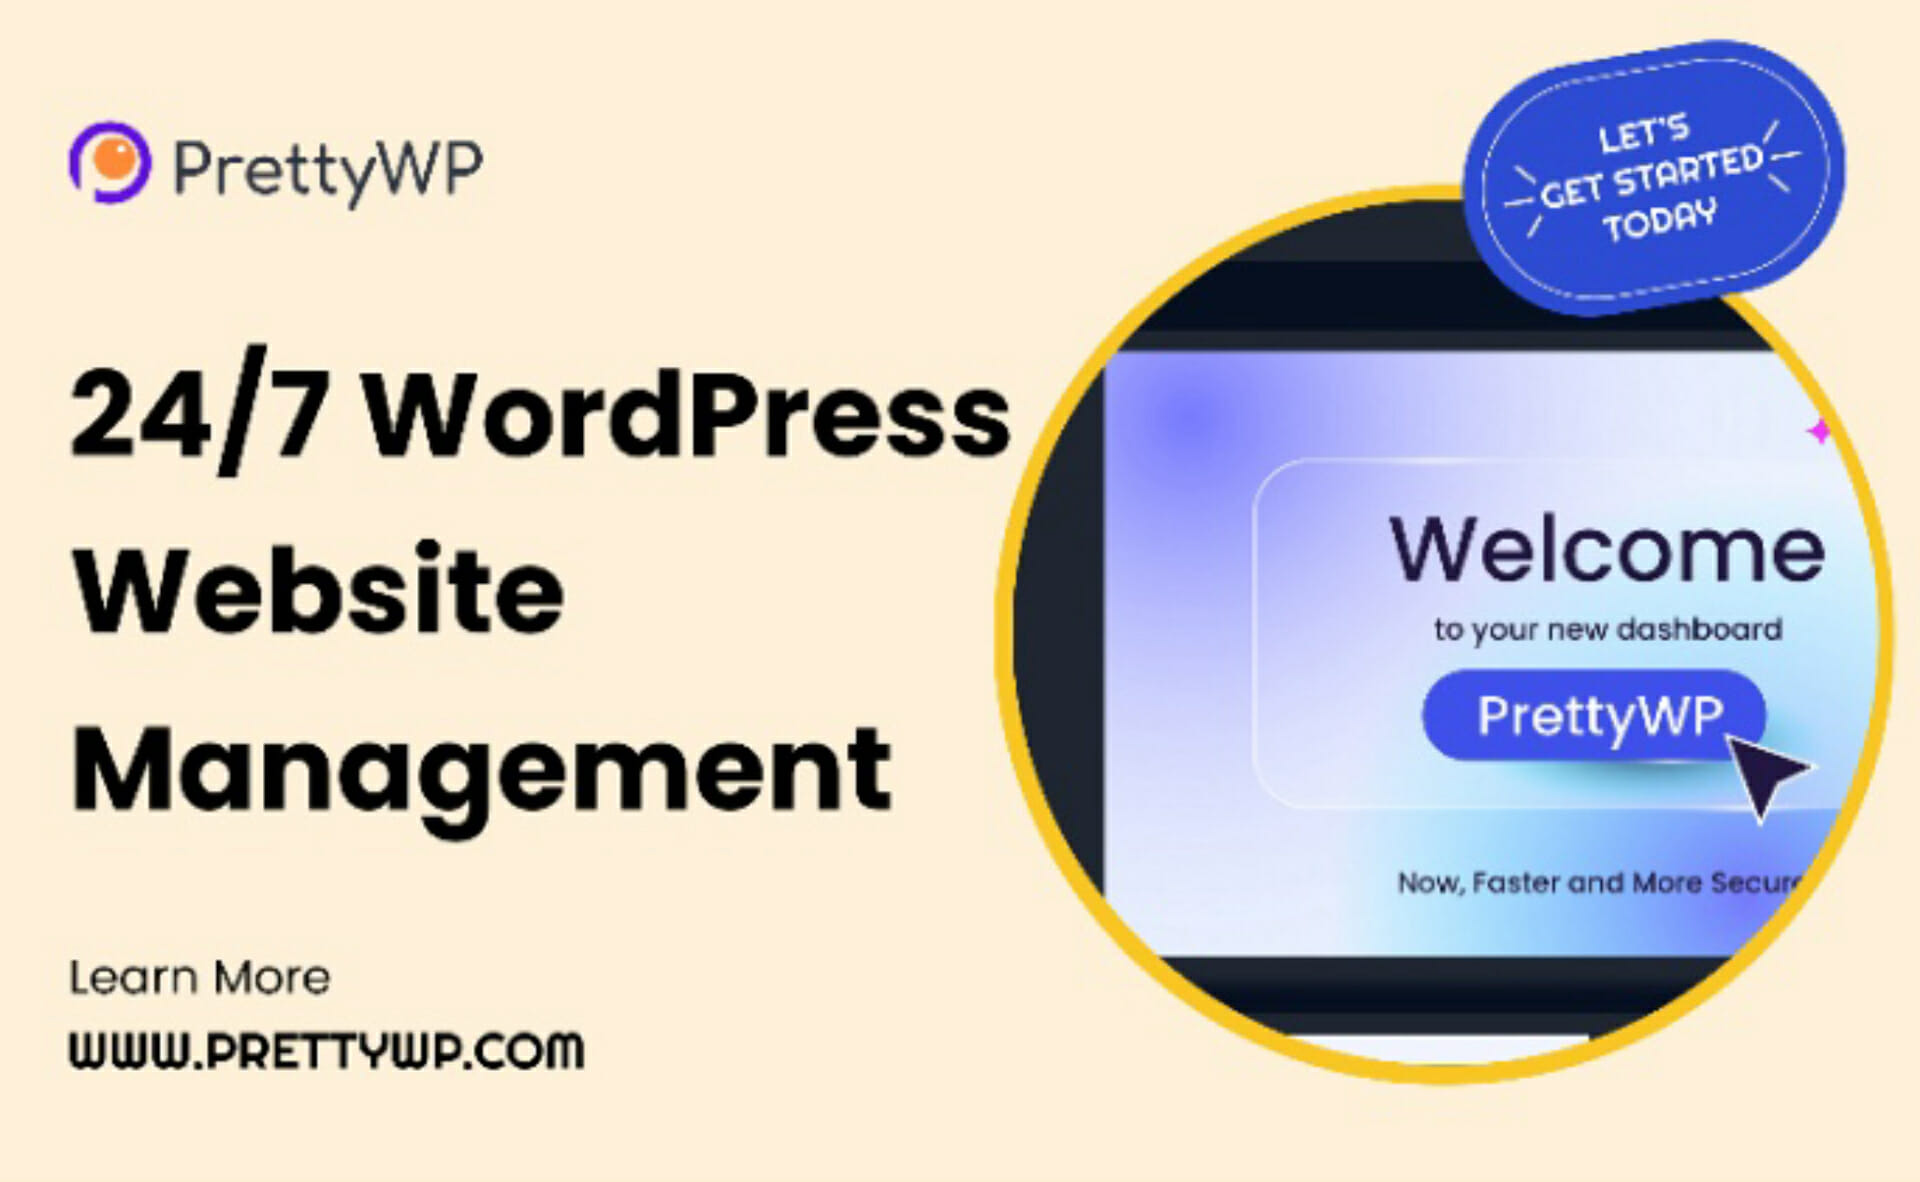 Lifetime Deal to PrettyWP – 24/7 WordPress Website Management: PWP Care for $29